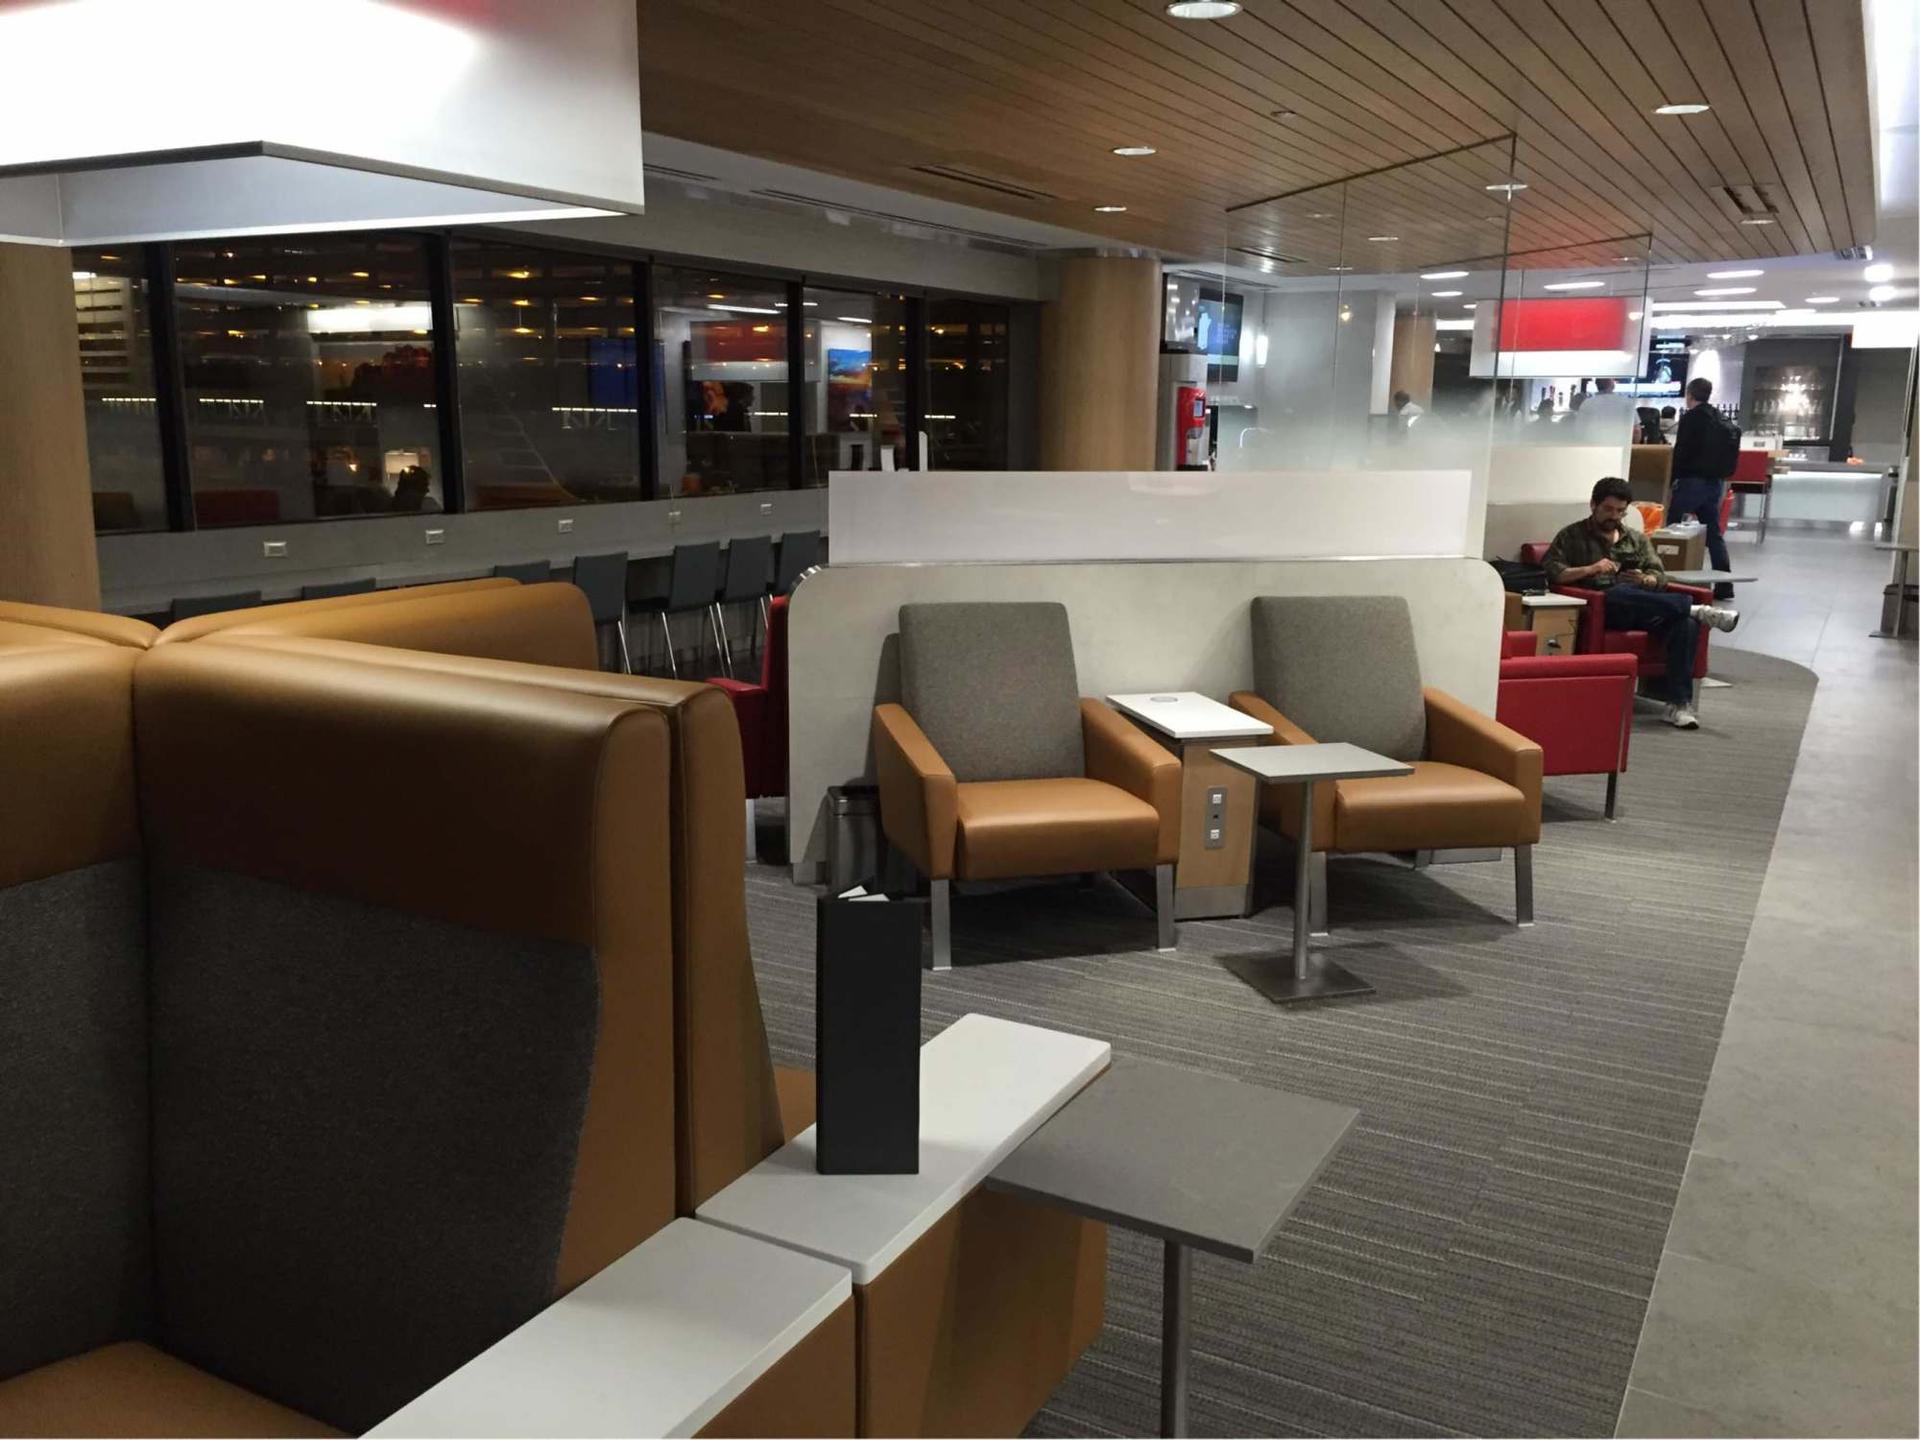 American Airlines Admirals Club (Gate A7) image 1 of 25